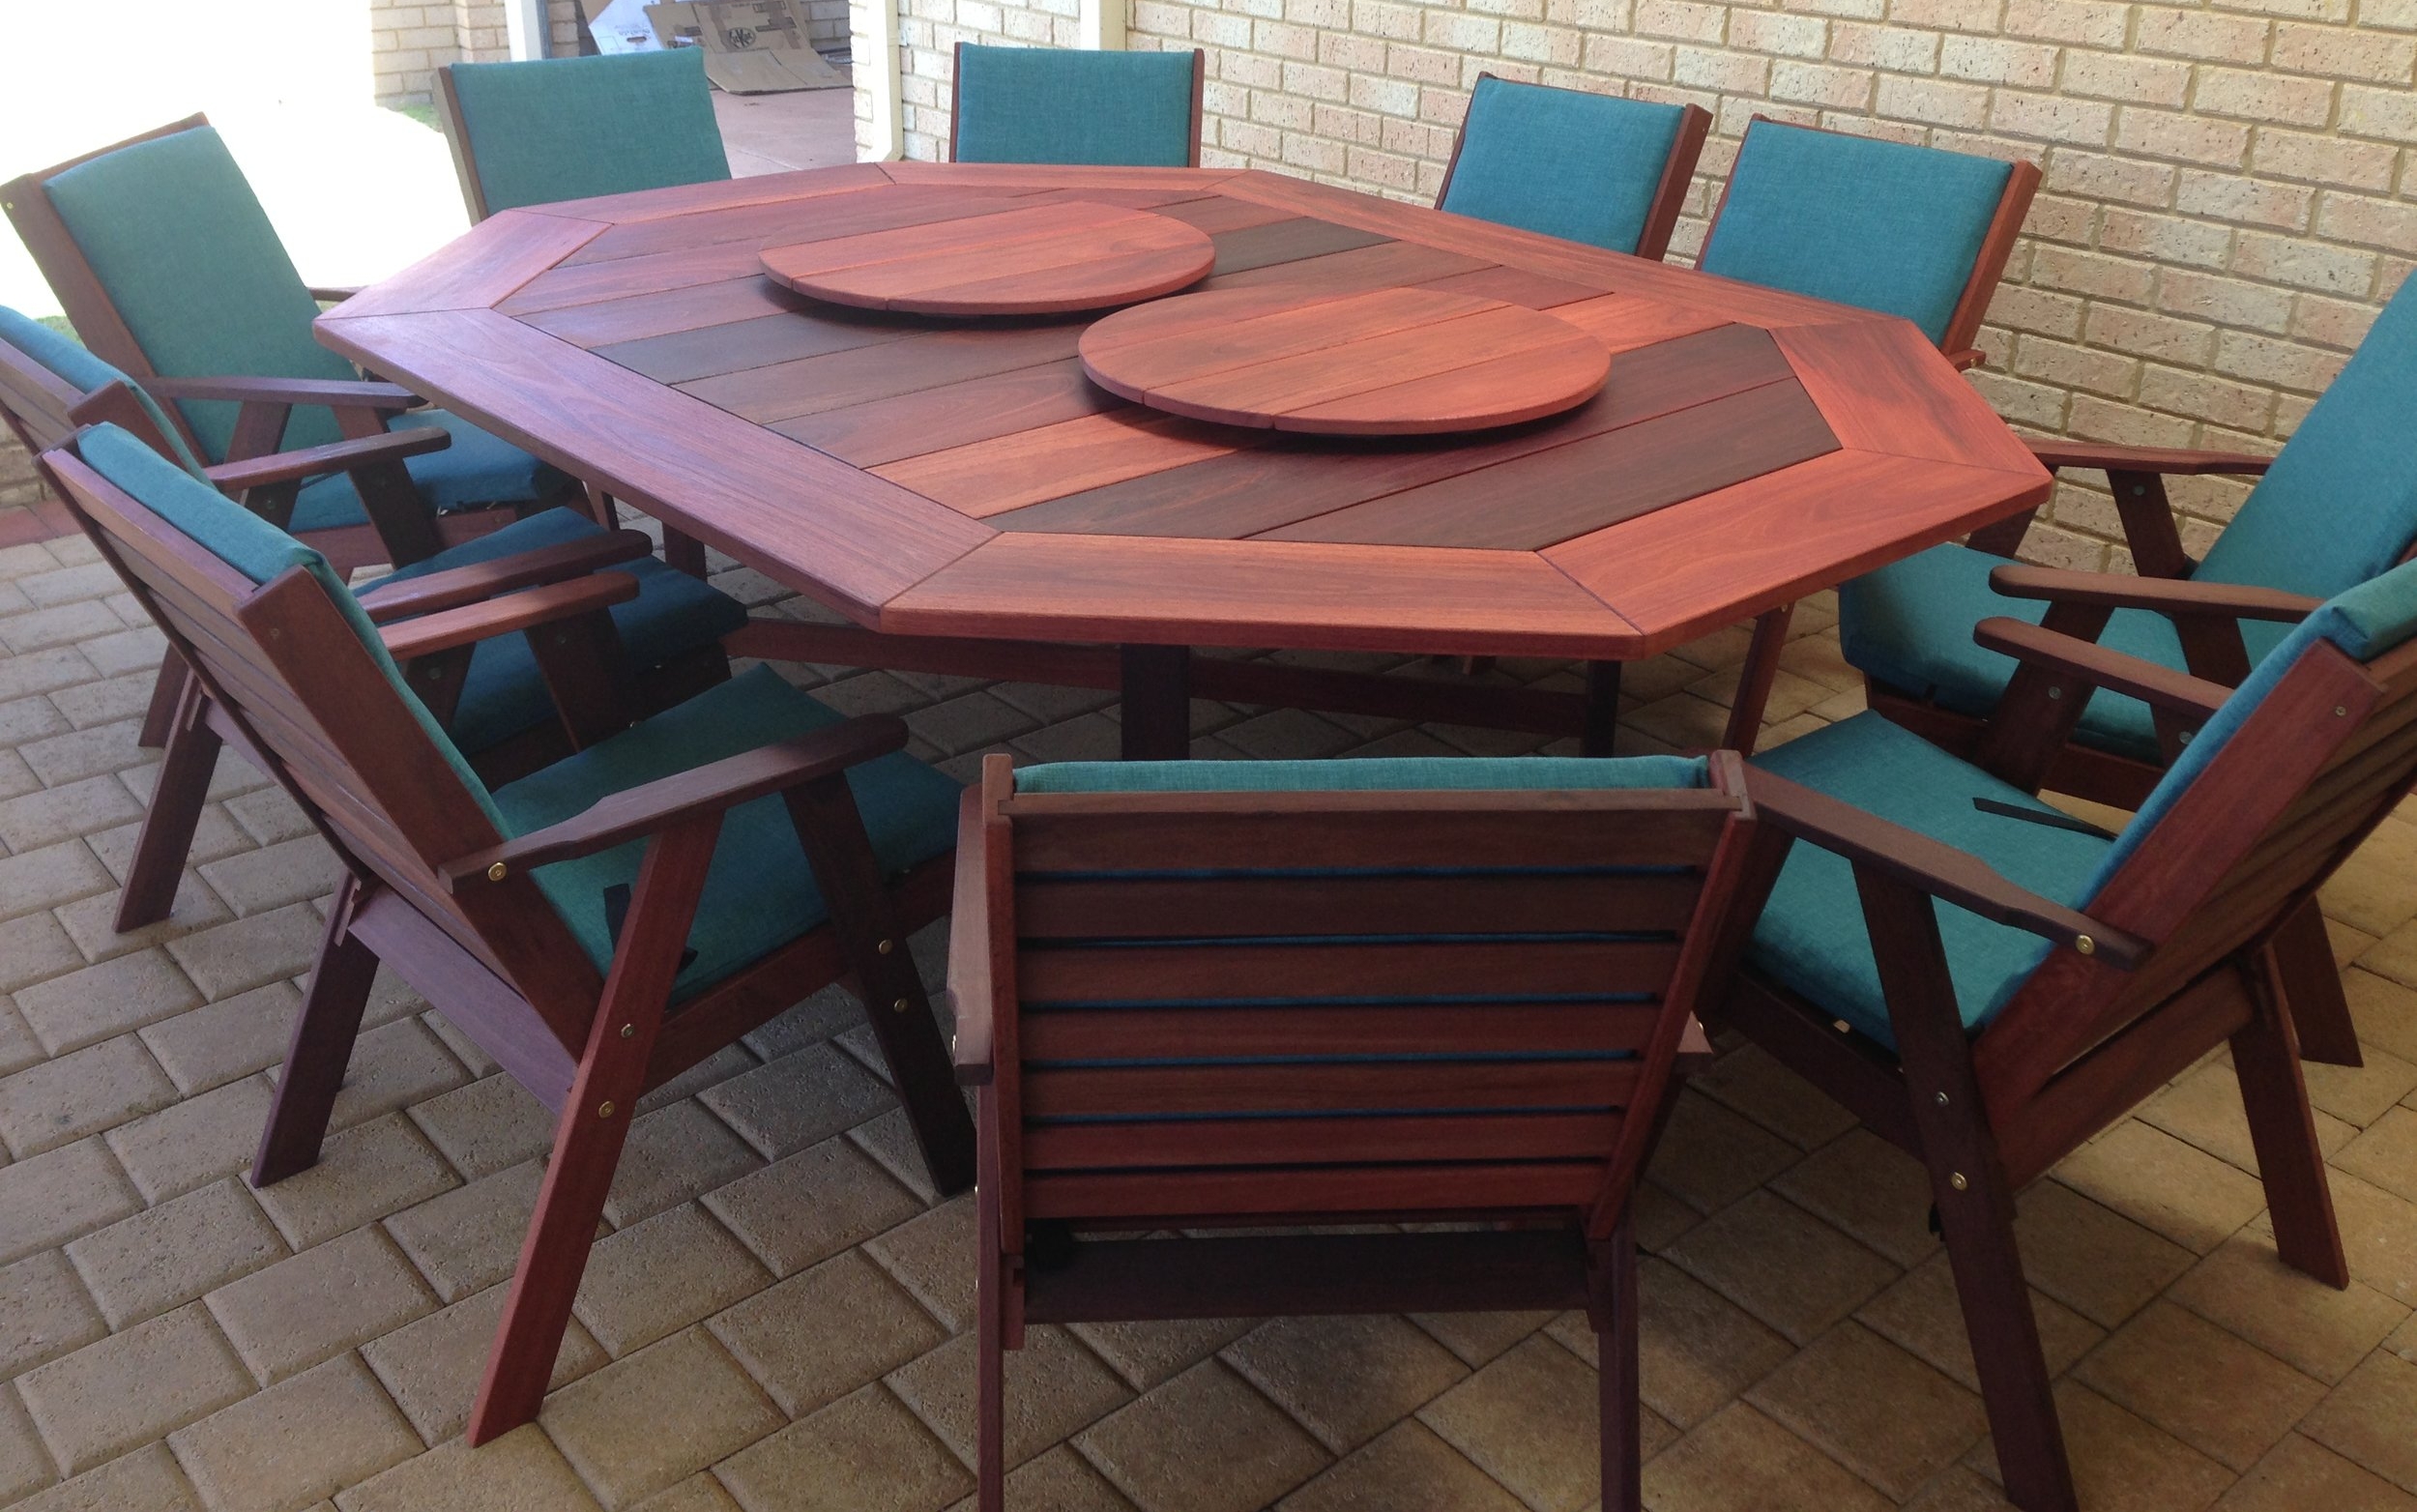  Octagonal 10 seat Jarrah table - this big friendly set allows everyone to see everyone else.&nbsp; This table measured 2400mm x 1600mm with two 700mm diameter Lazy Susans. 